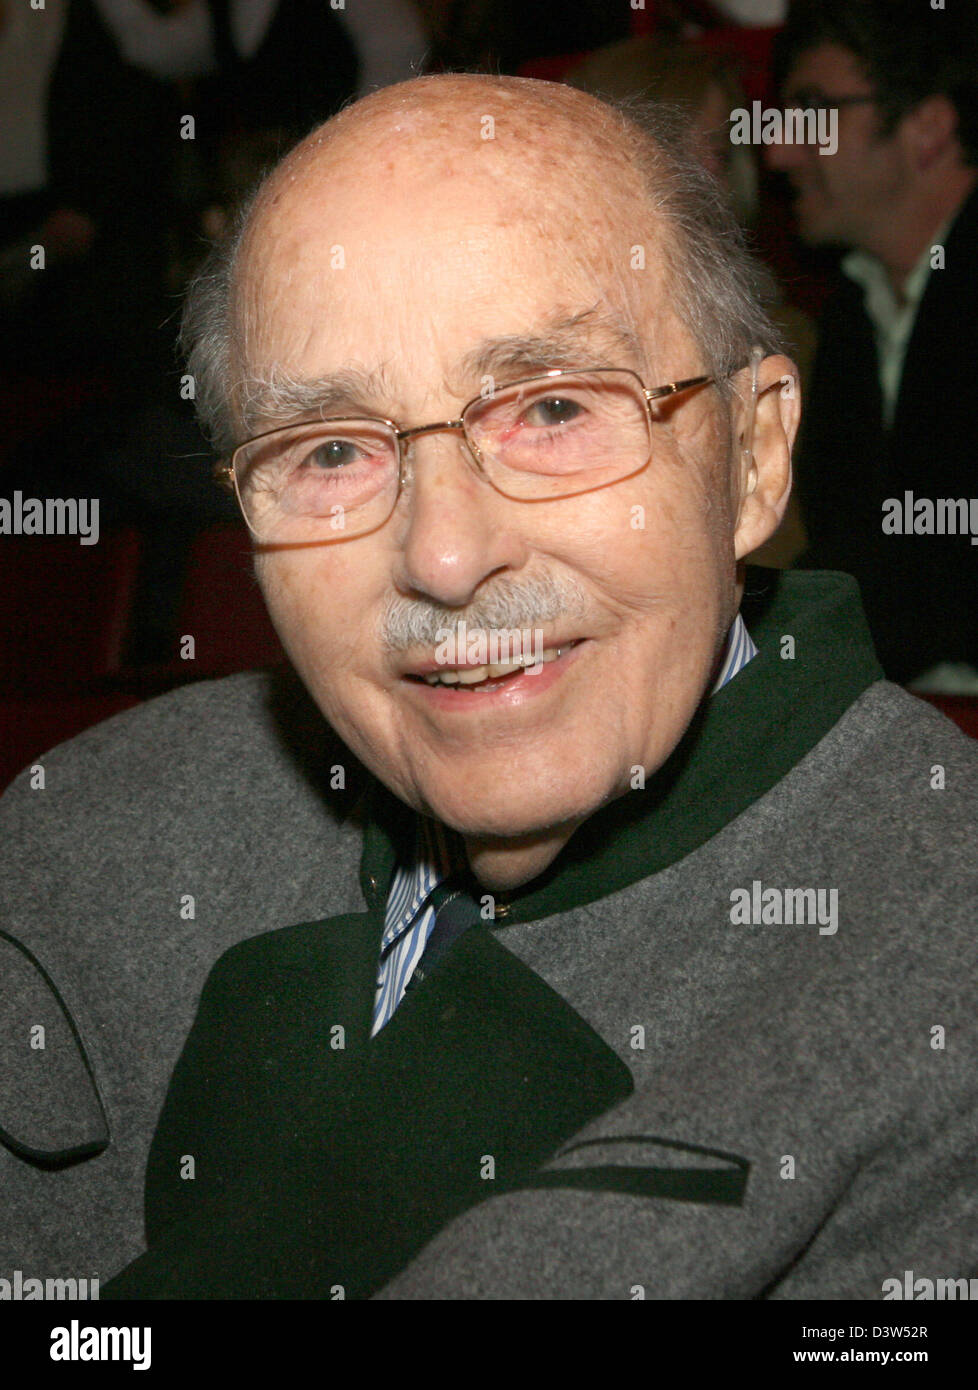 The picture shows Otto von Habsburg during Circus Krone's winter programme premiere show in Munich, Germany, Monday, 25 December  2006. Otto von Habsburg is the current head of the Habsburg family and the eldest son of Karl of Austria, the last Emperor of Austria and last King of Hungary. He is a former member of the European Parliament for the CSU party and president of the Intern Stock Photo